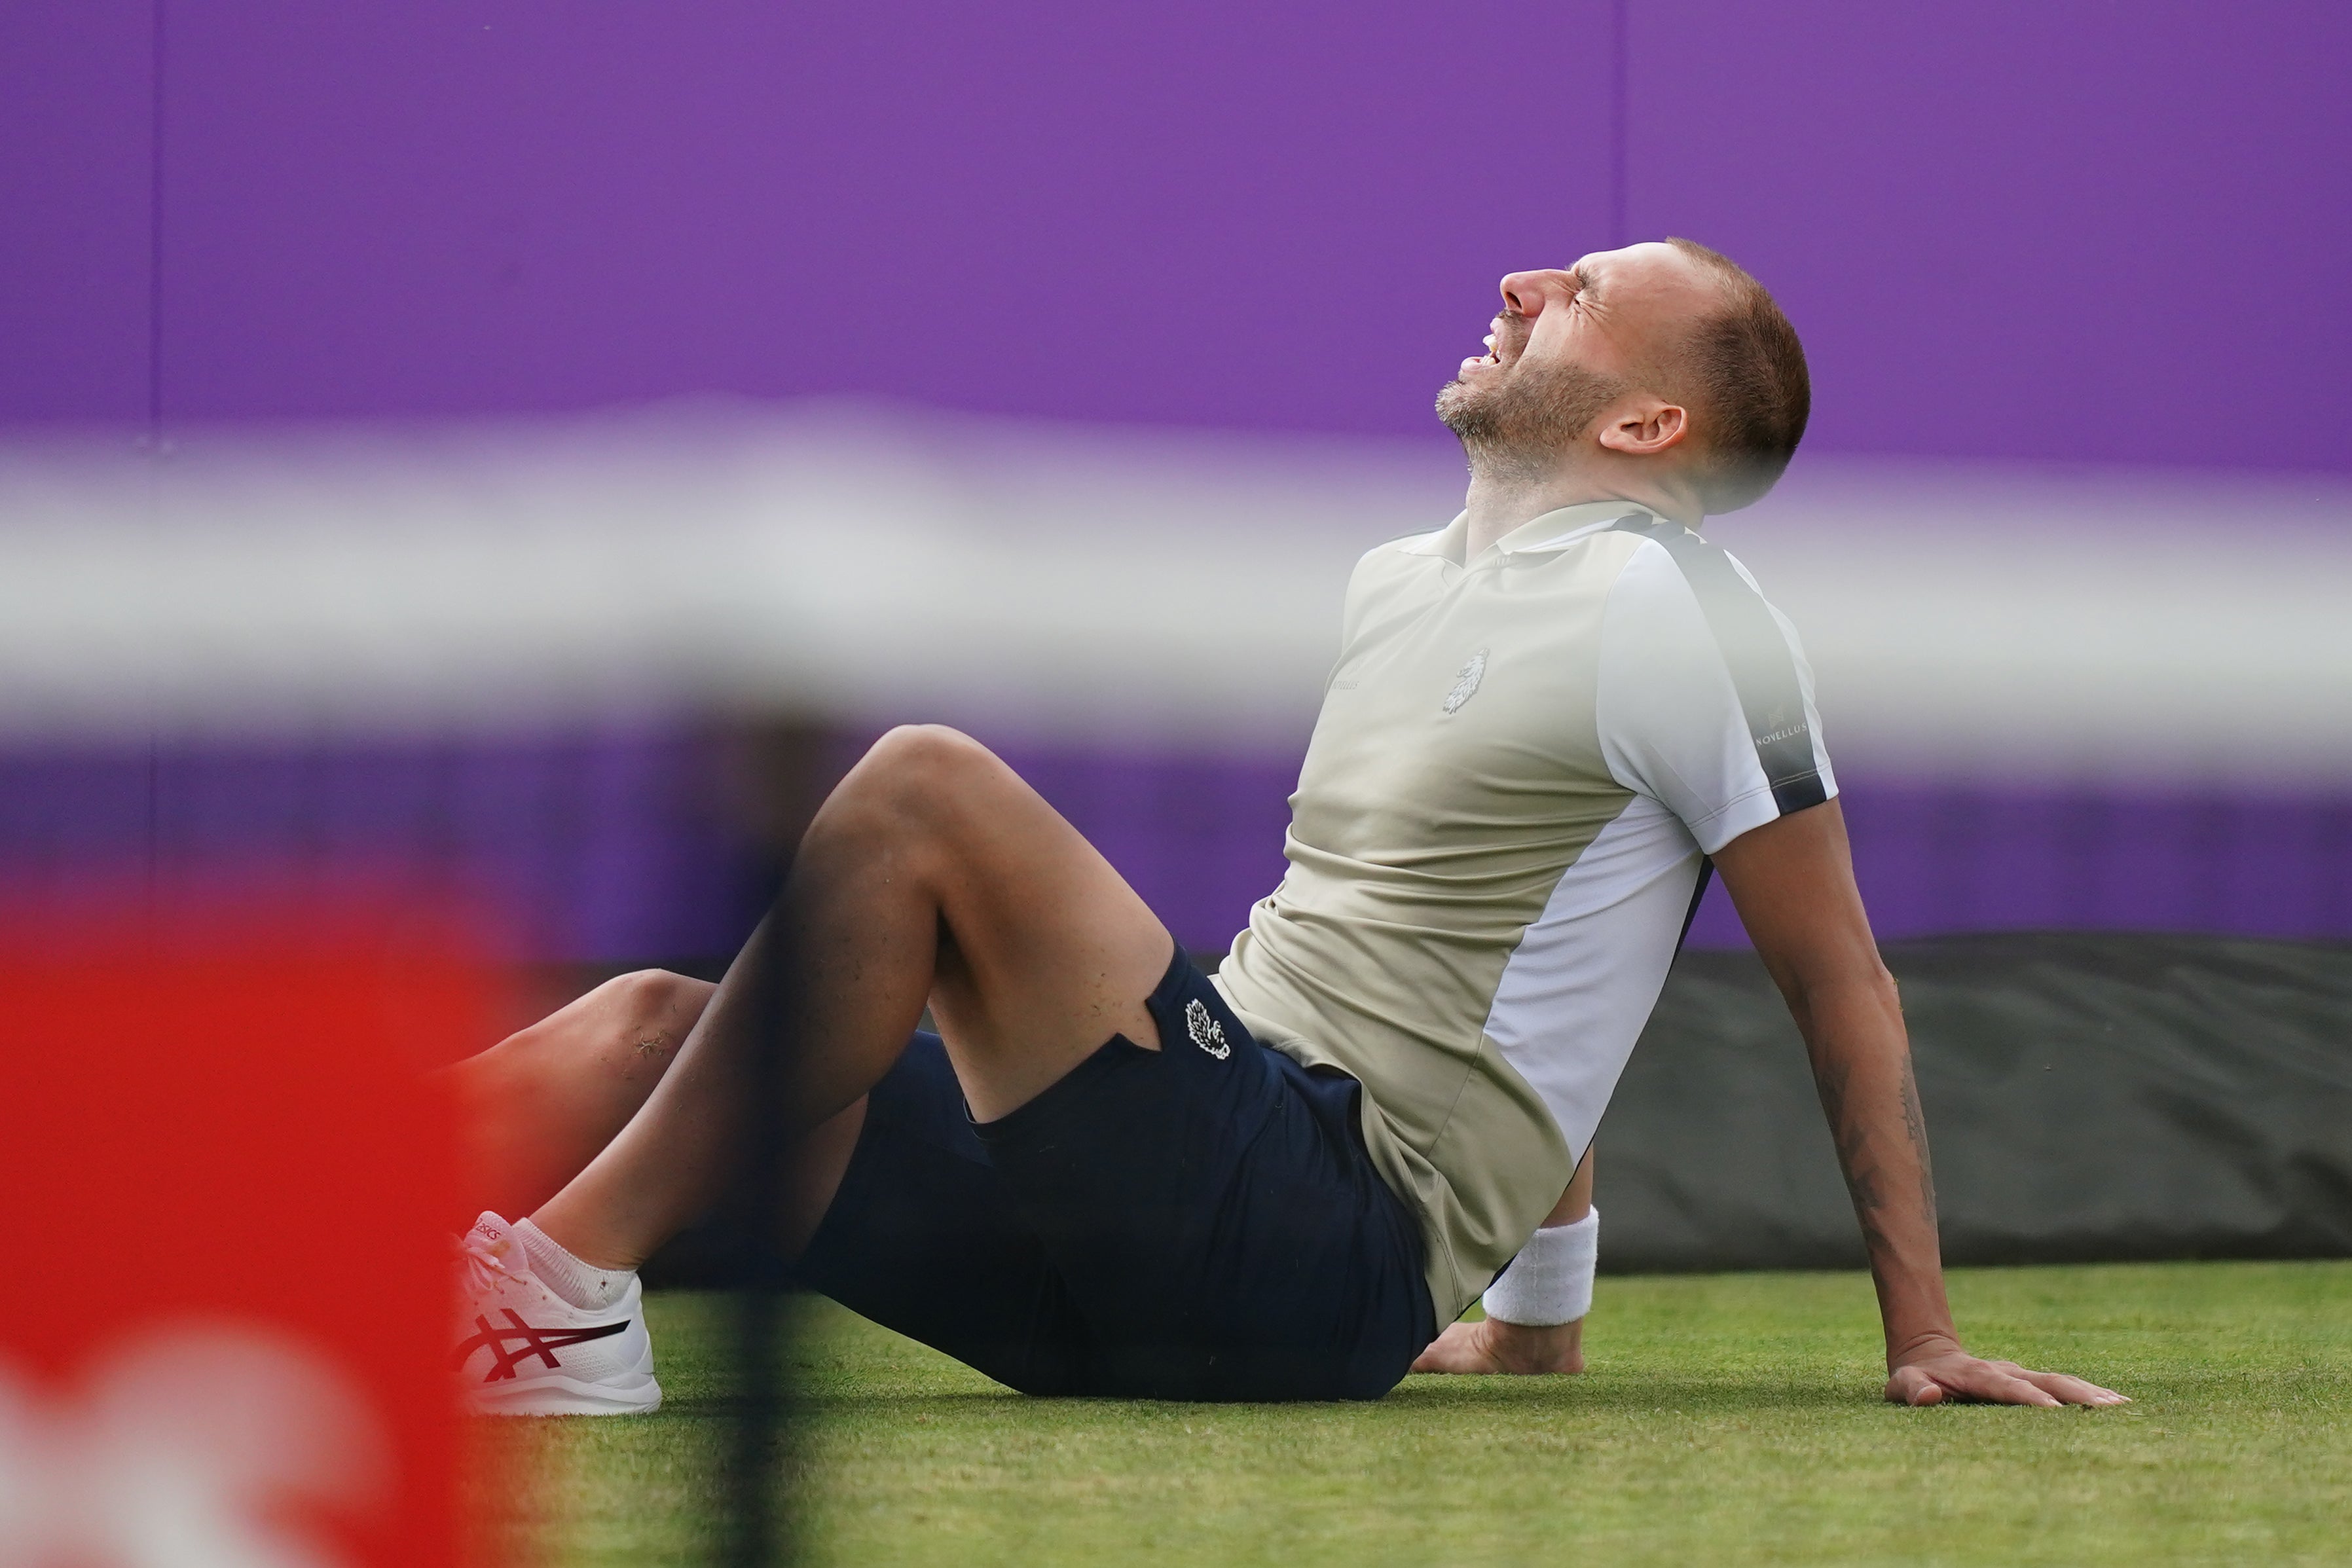 Evans reacts after slipping and hurting his knee at Queen’s Club (Zac Goodwin/PA)